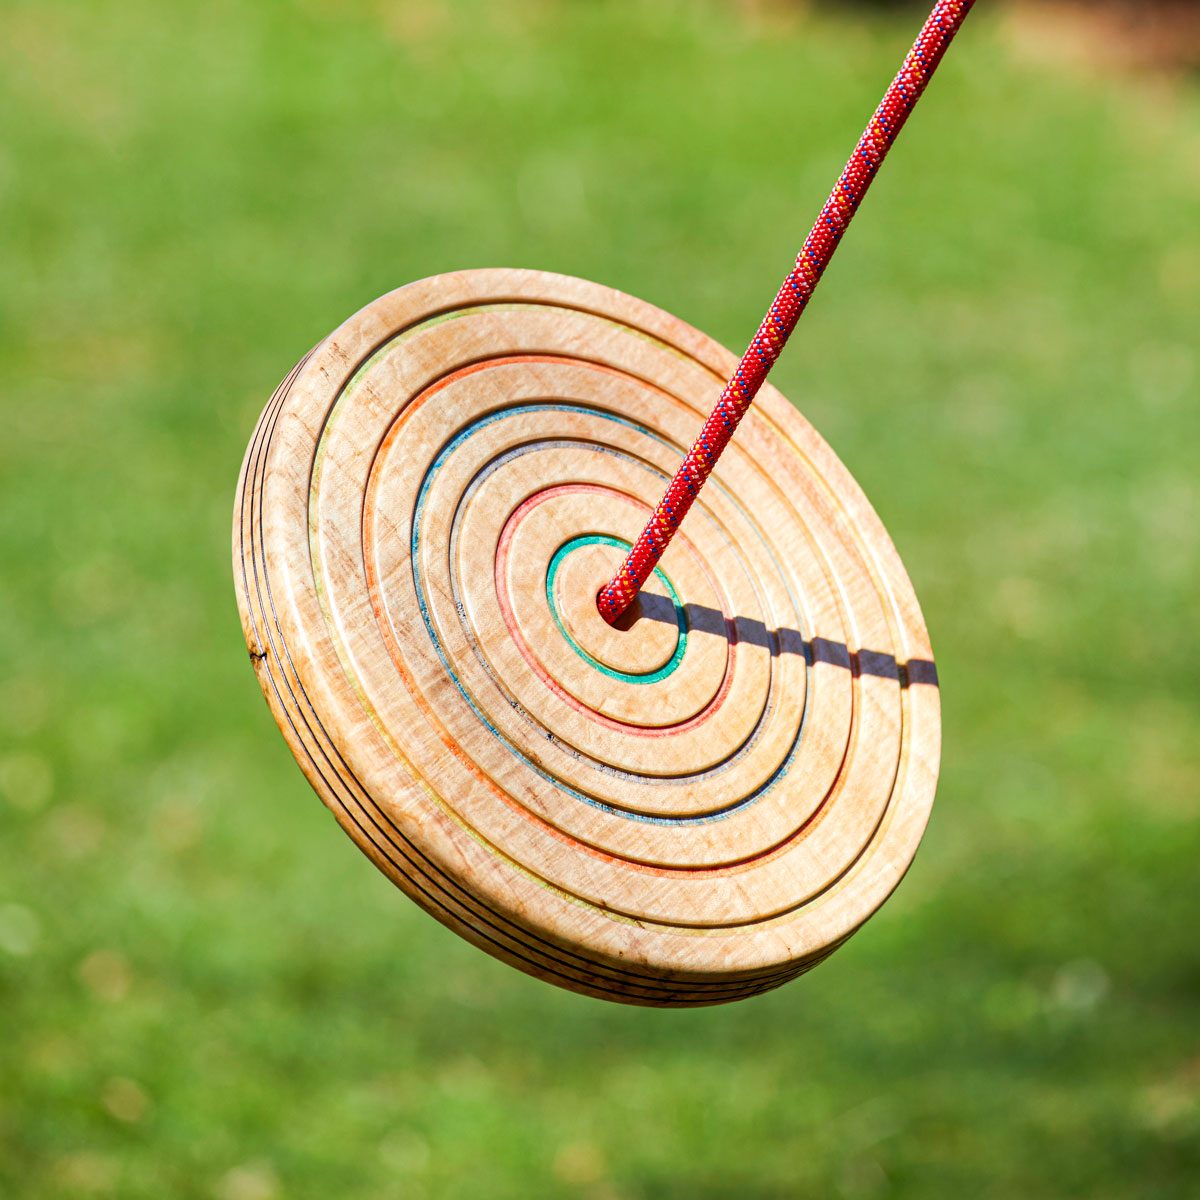 How to Make a Wooden Disc Swing